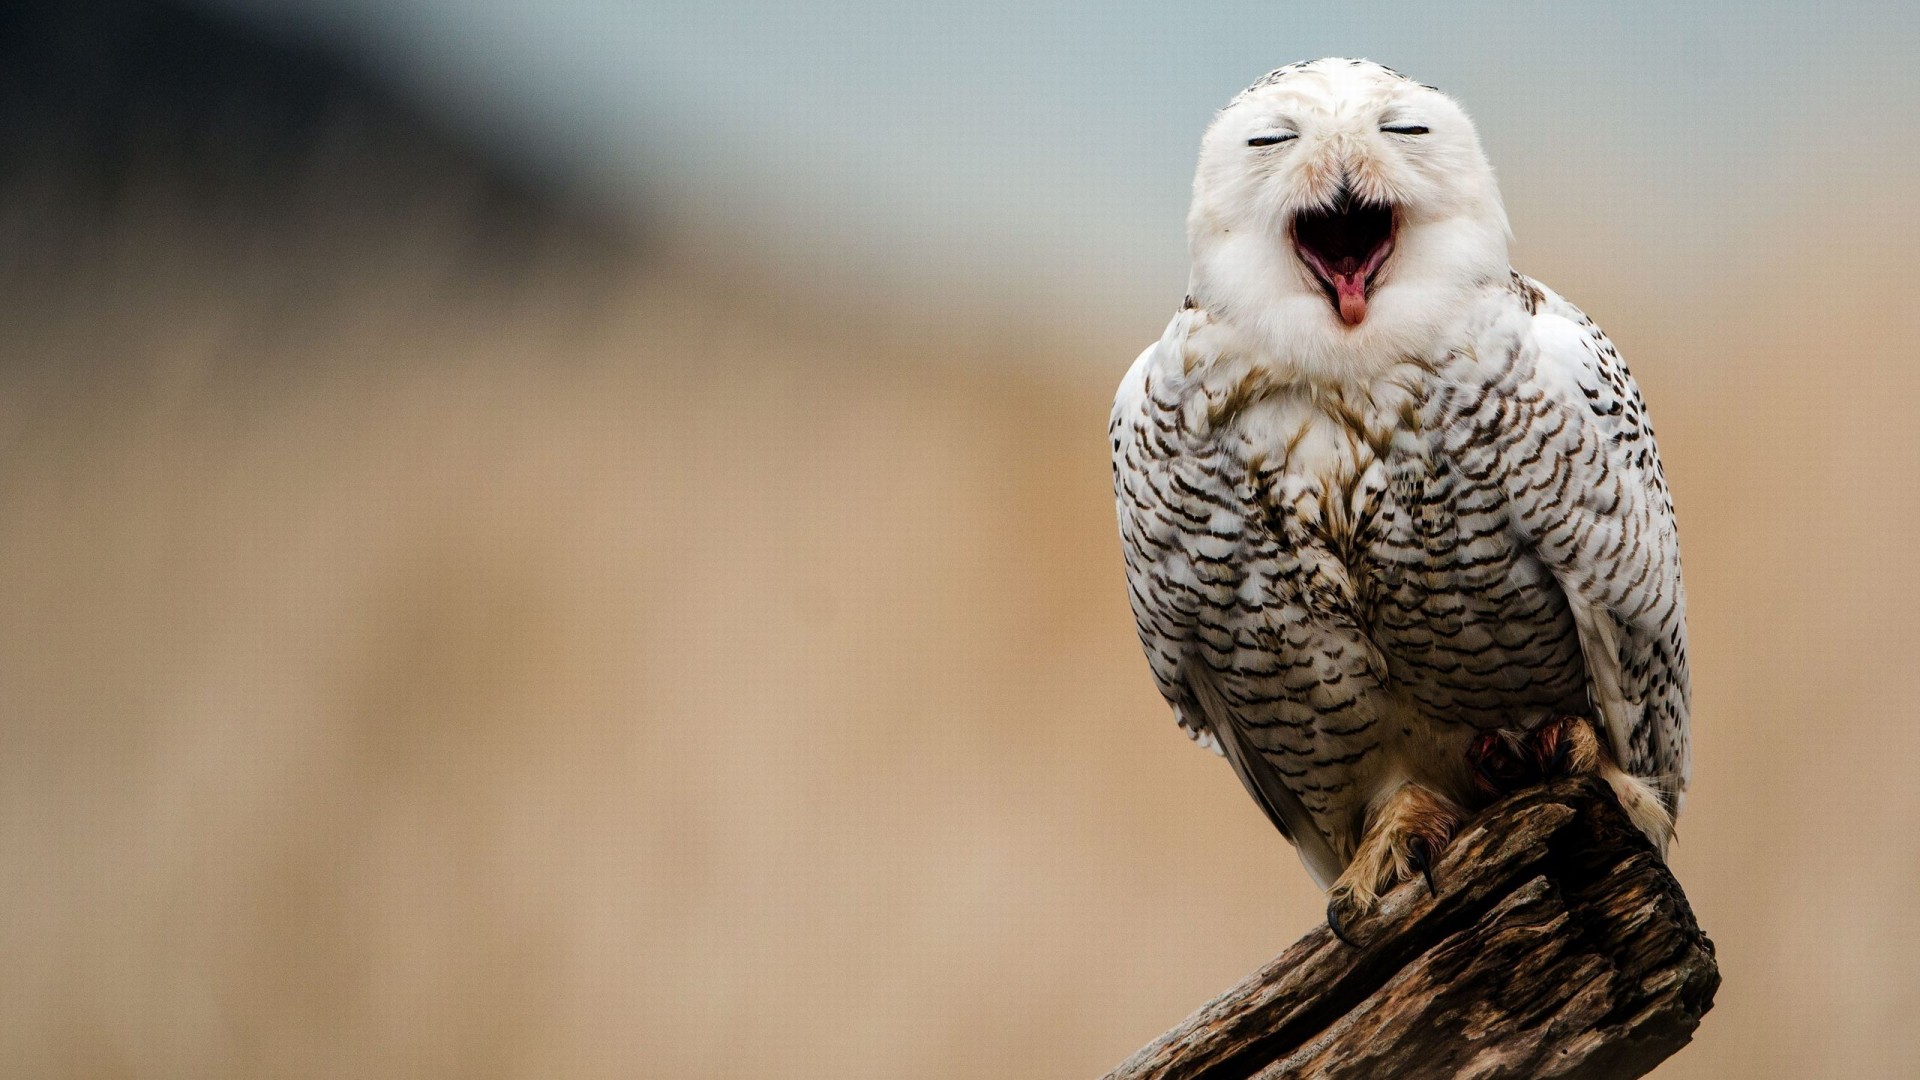 Snowy Owl Wallpaper 1920×1080 - Snowy Owl Wallpaper Hd , HD Wallpaper & Backgrounds